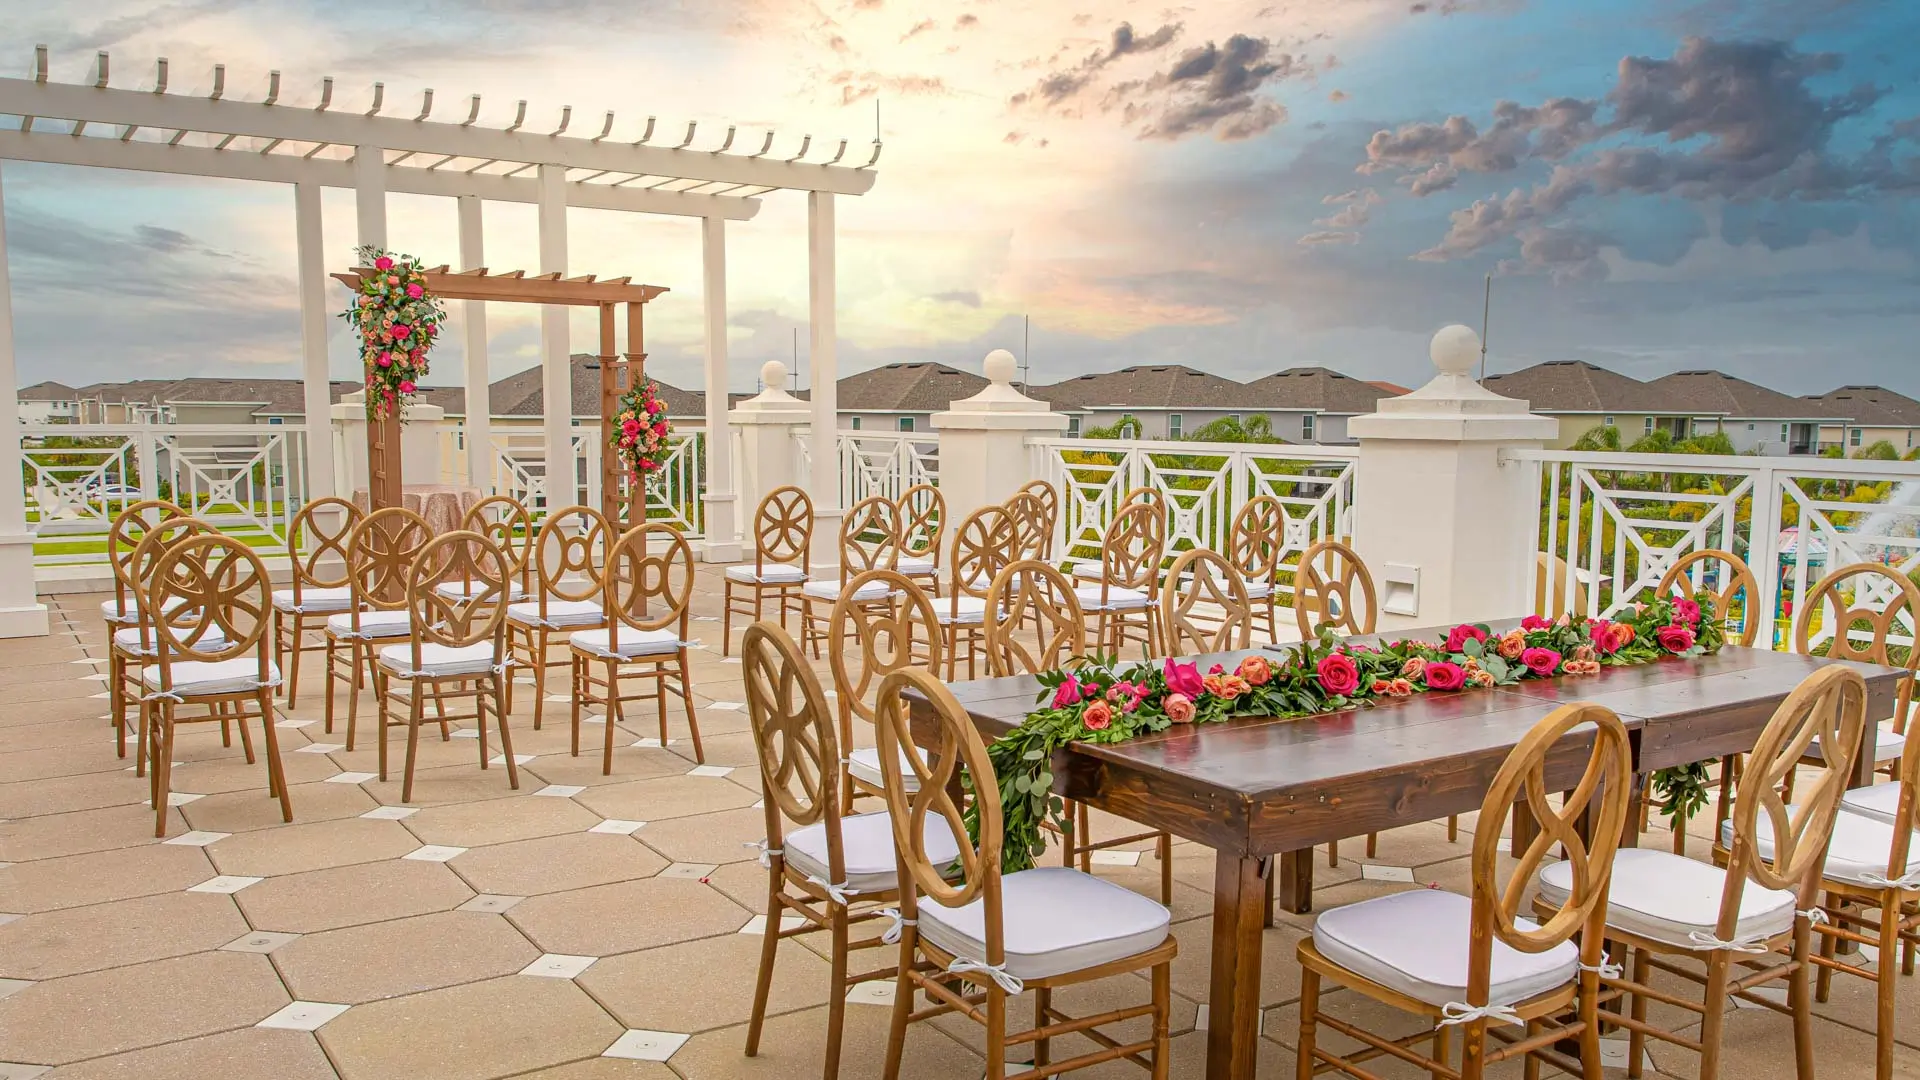 Encore's outdoor clubhouse terrace decorated for a wedding at sunset.